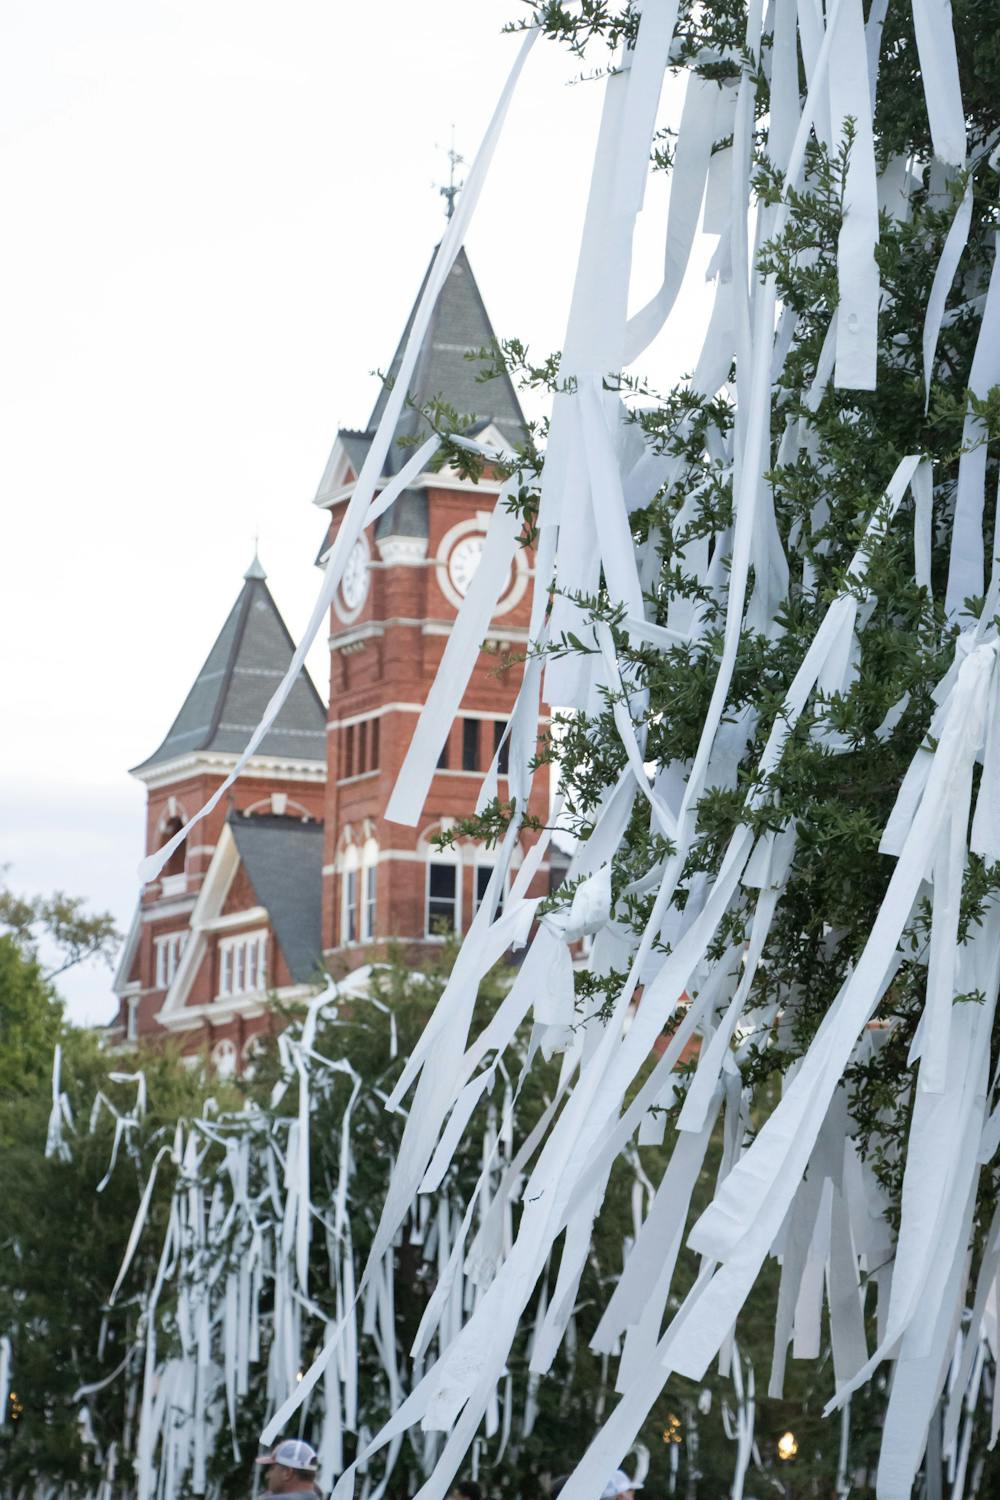 Samford Hall in the background of the toilet-papered trees of Toomer's Corner after Auburn football beat UMass on September 2nd, 2023.